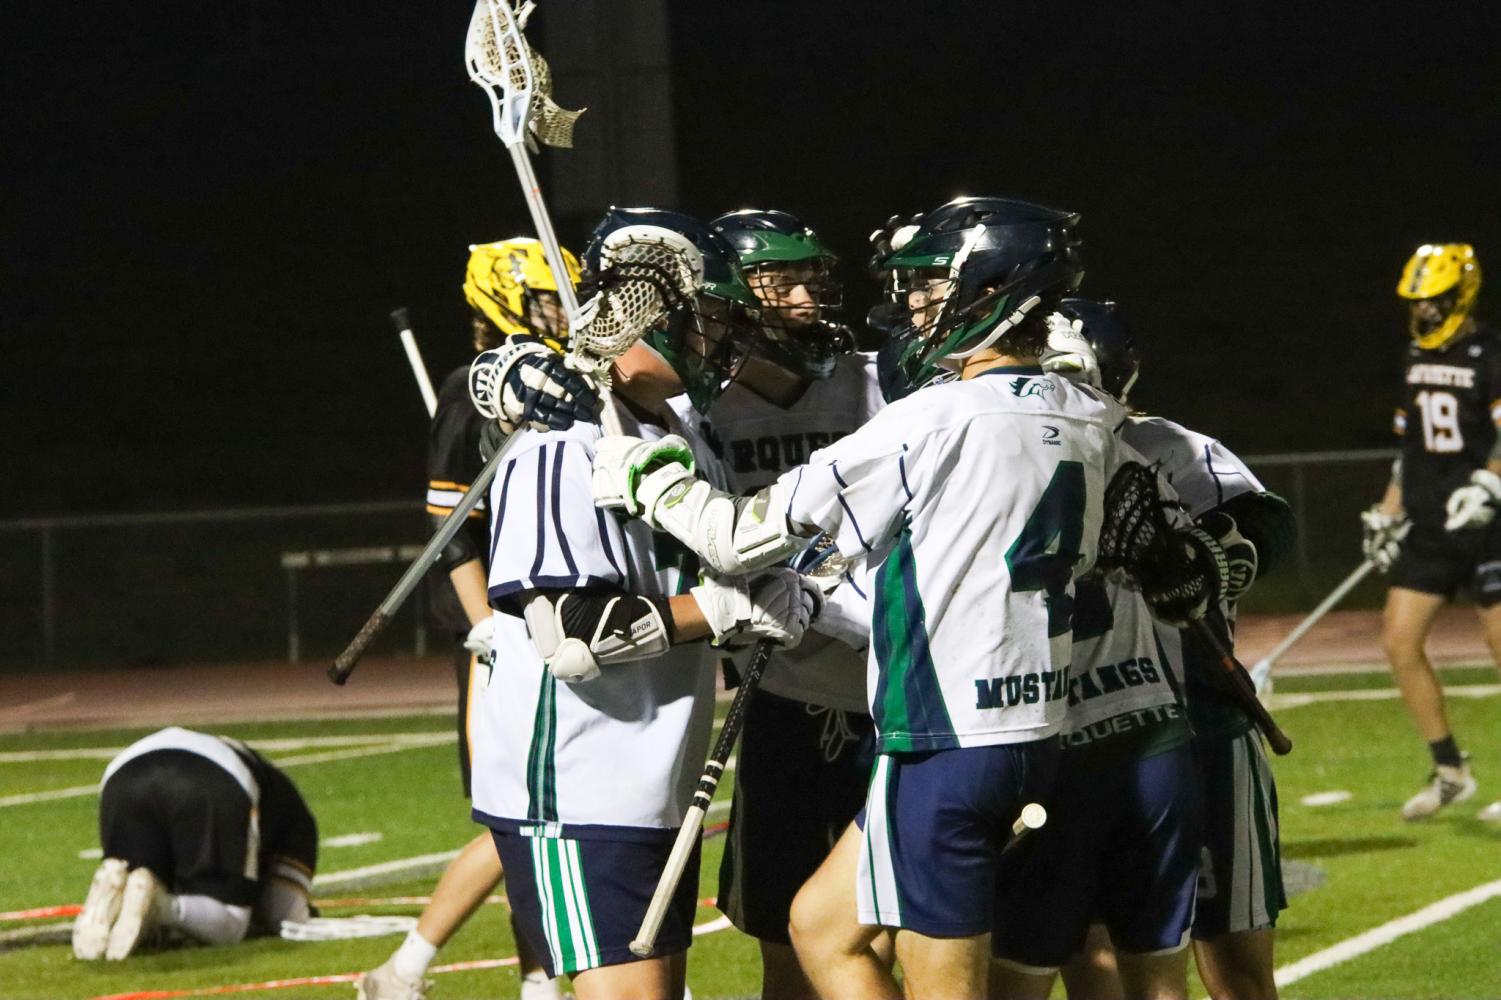 Photo+Gallery%3A+Boys+Lacrosse+Defeats+Lafayette+to+Advance+to+Second+Round+of+Playoffs